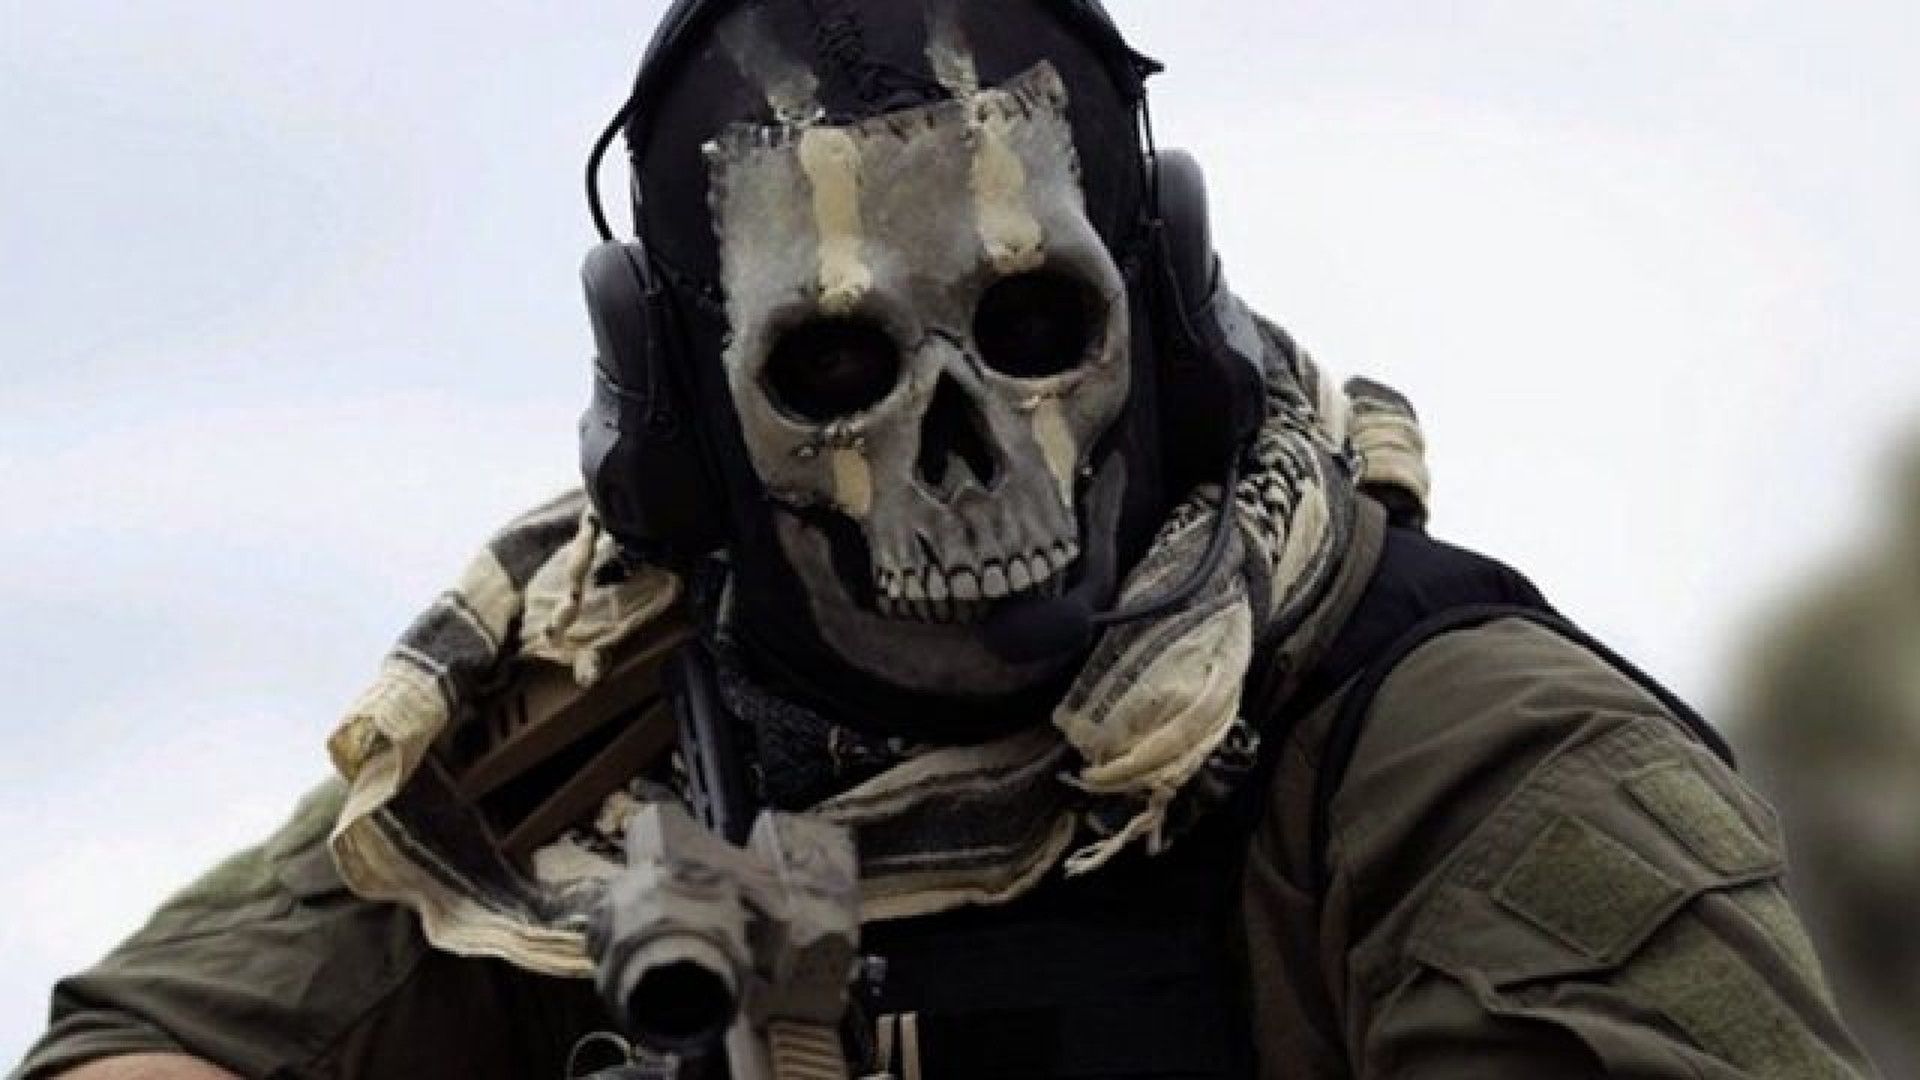 A soldier with a skeleton mask looks over their gun and into the camera